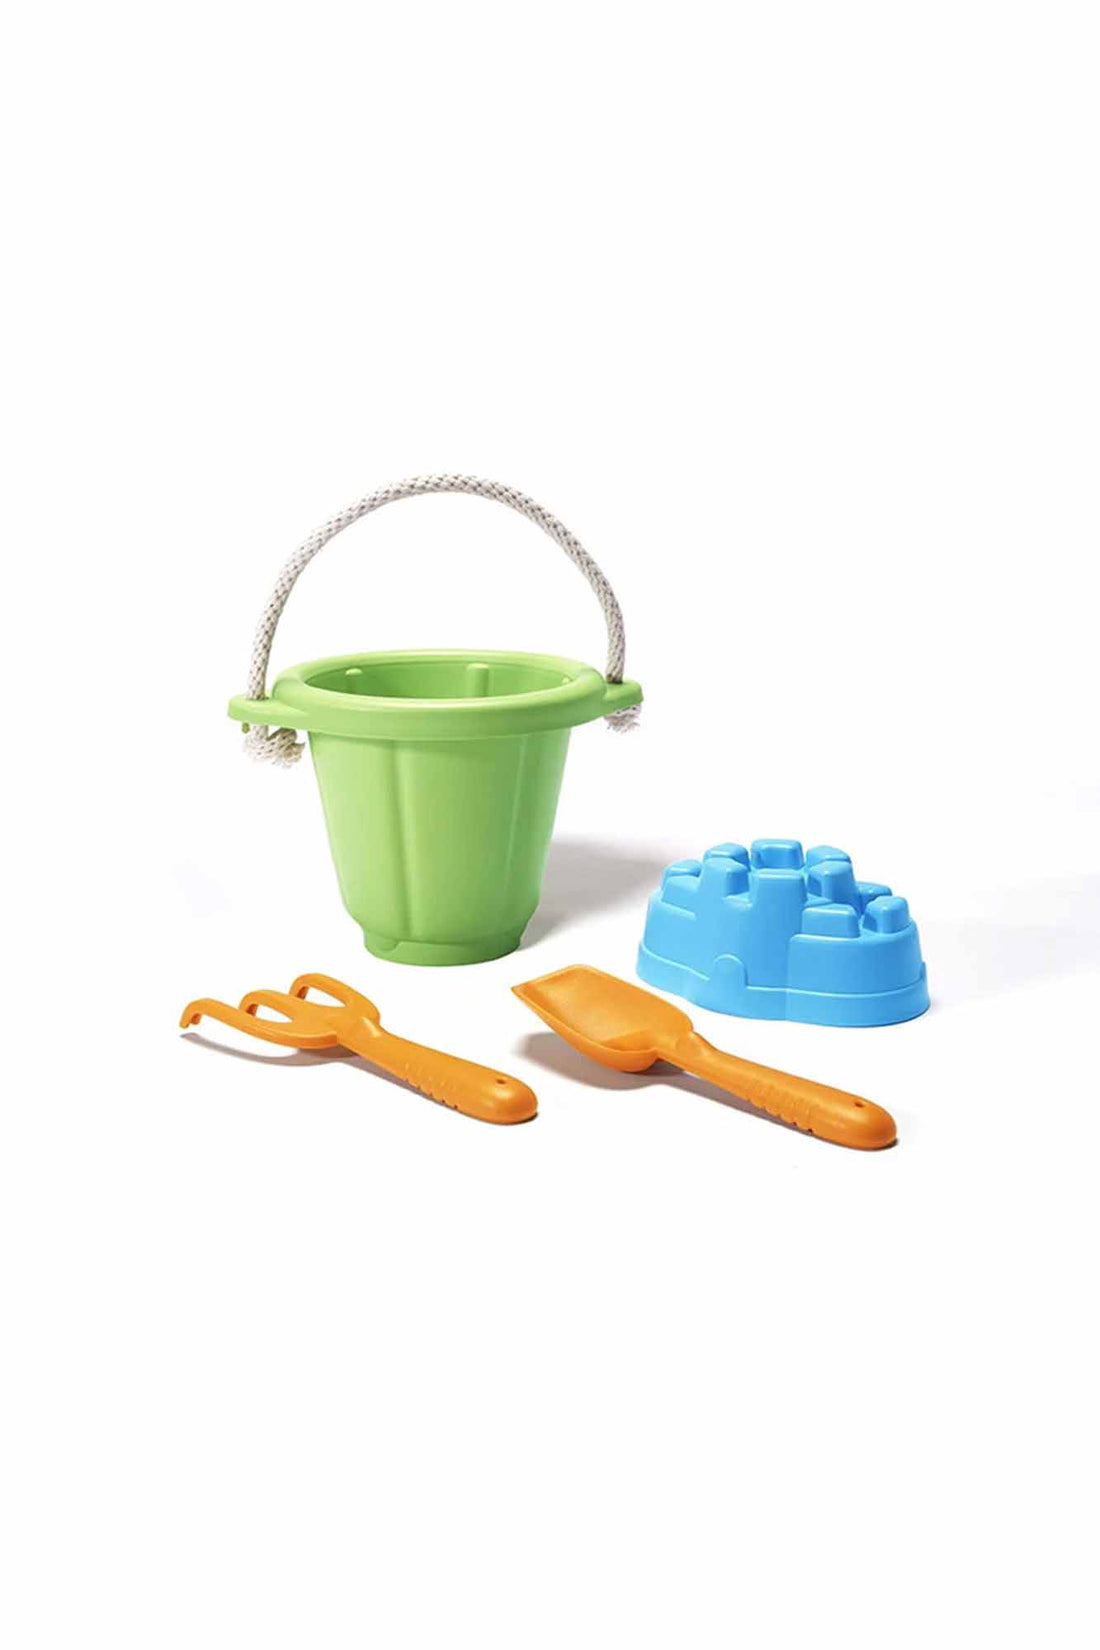 GREEN TOYS SAND PLAY SET GREEN